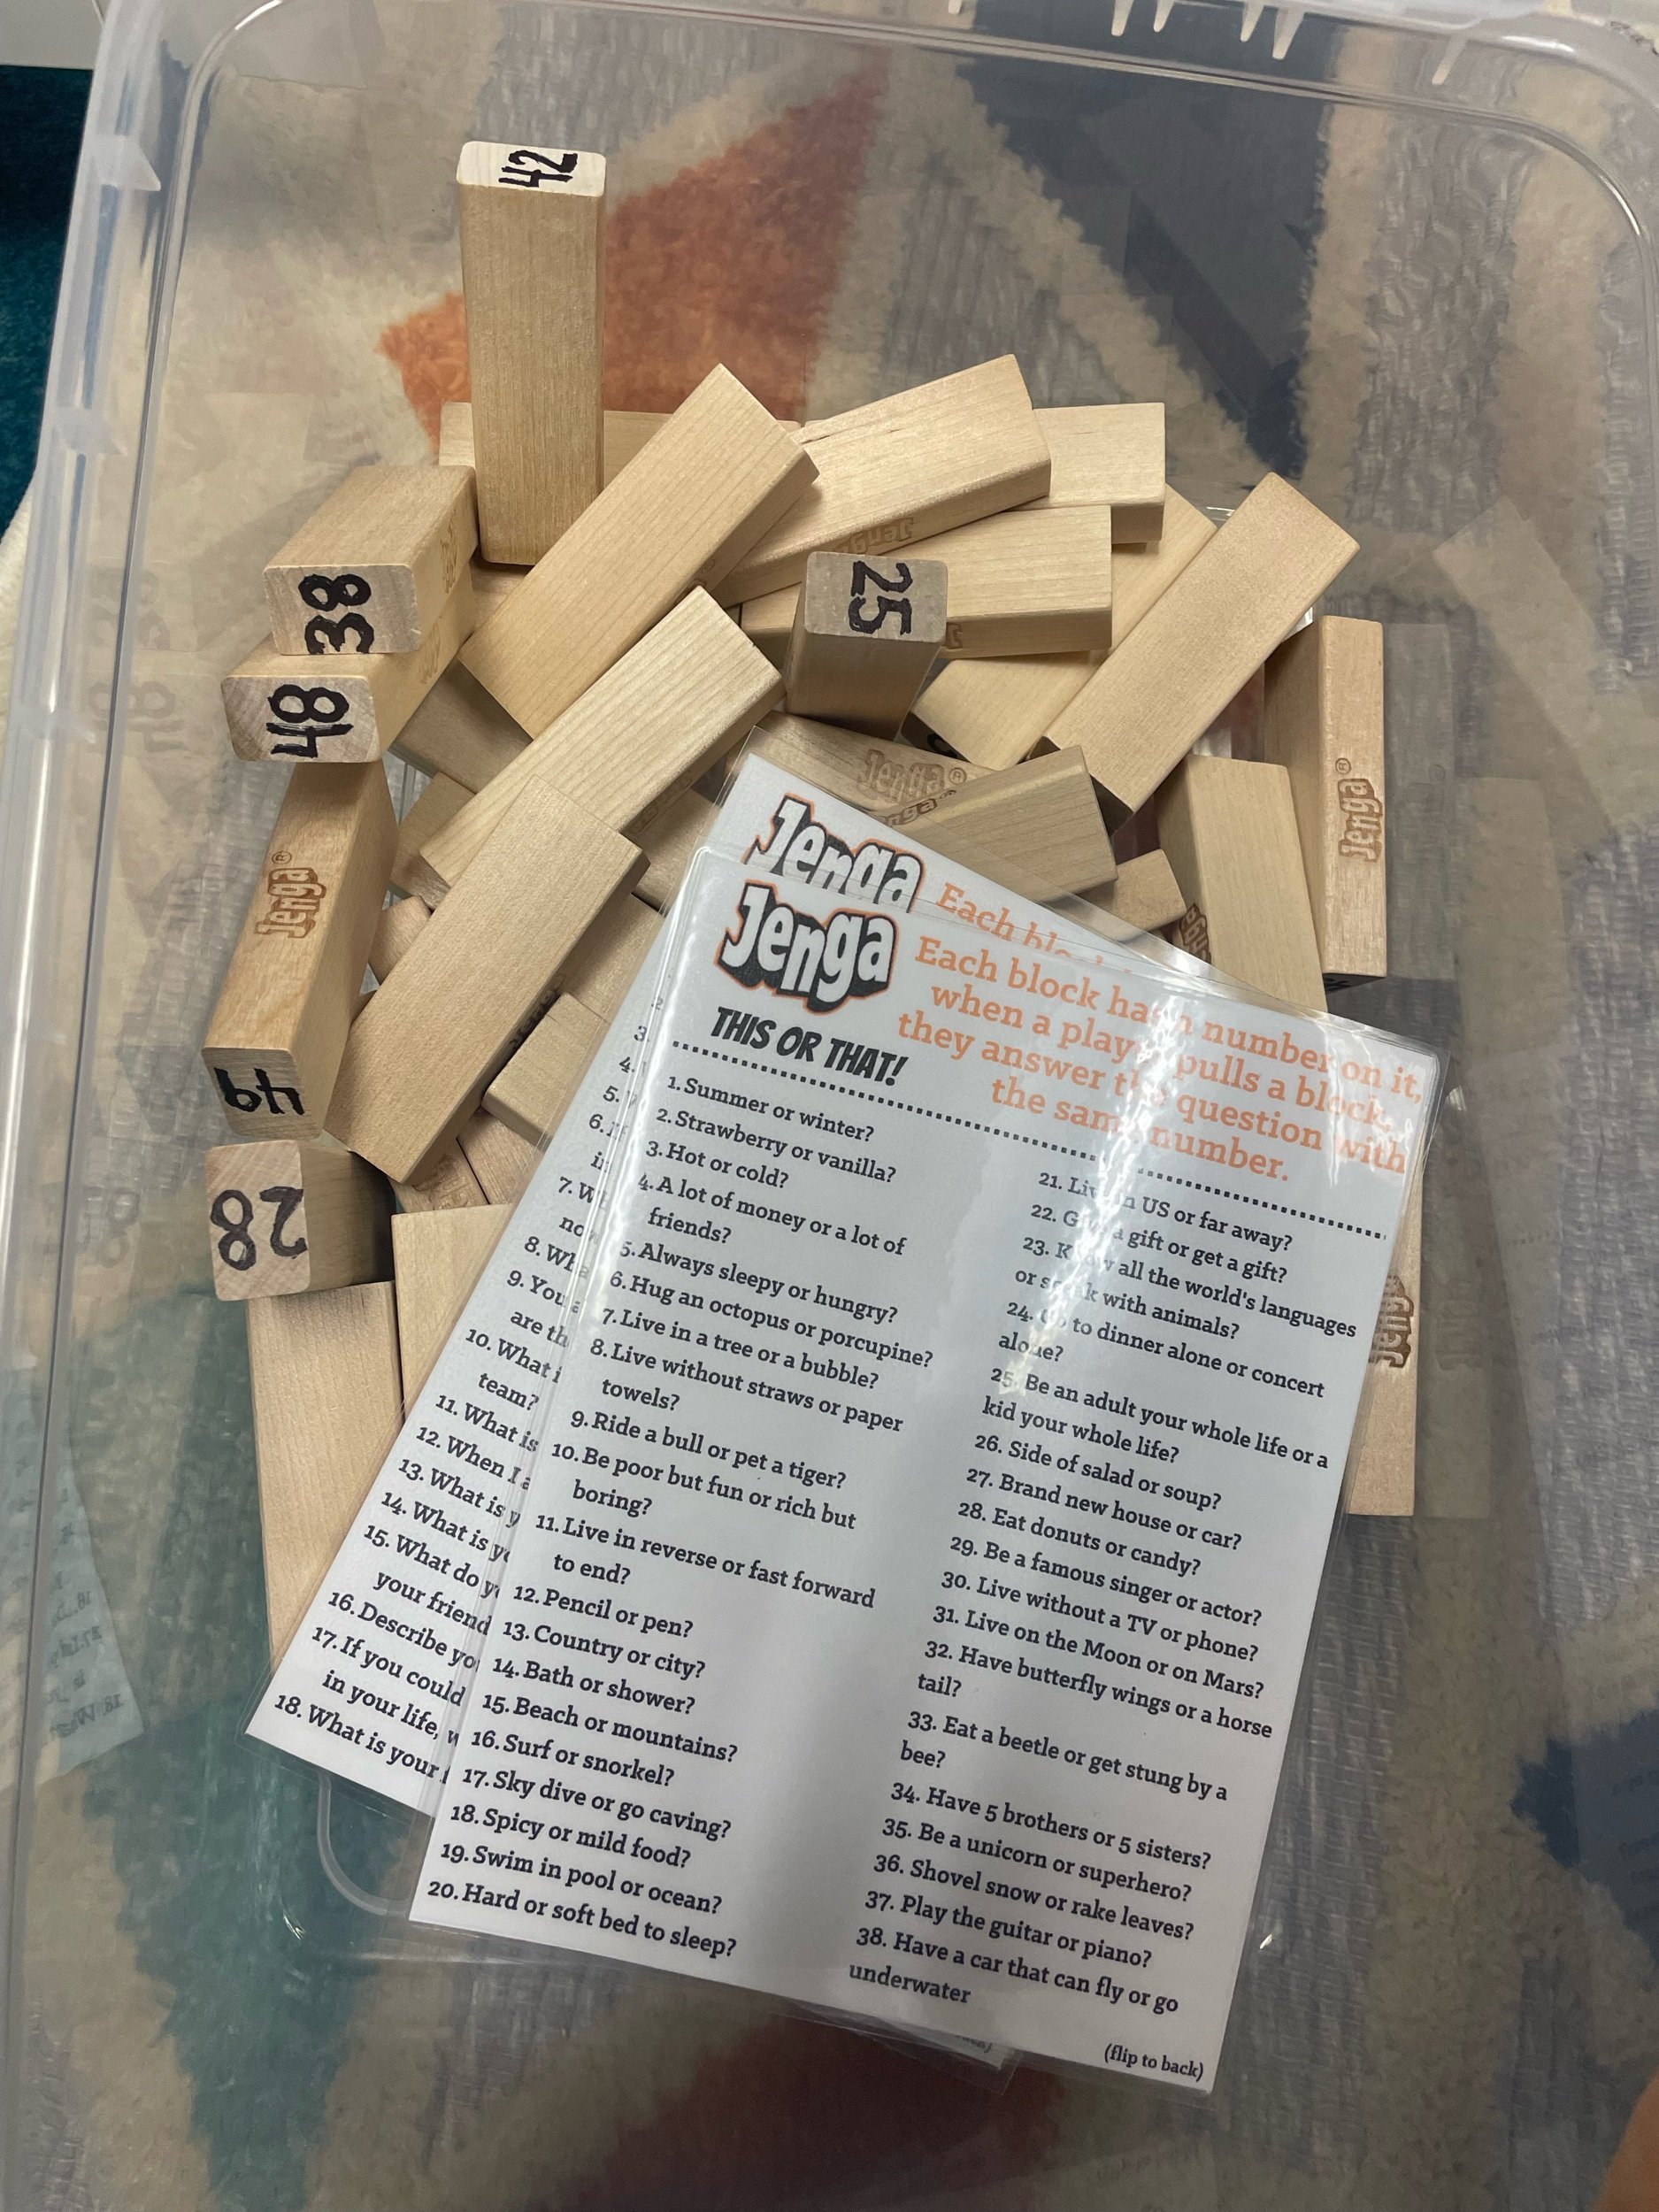  Games like Jenga can easily be made into a therapeutic game with a little extra work! Each Jenga block has a number on it that correlates with a question. There are several different versions of the question sheets that can be used for a variety of 